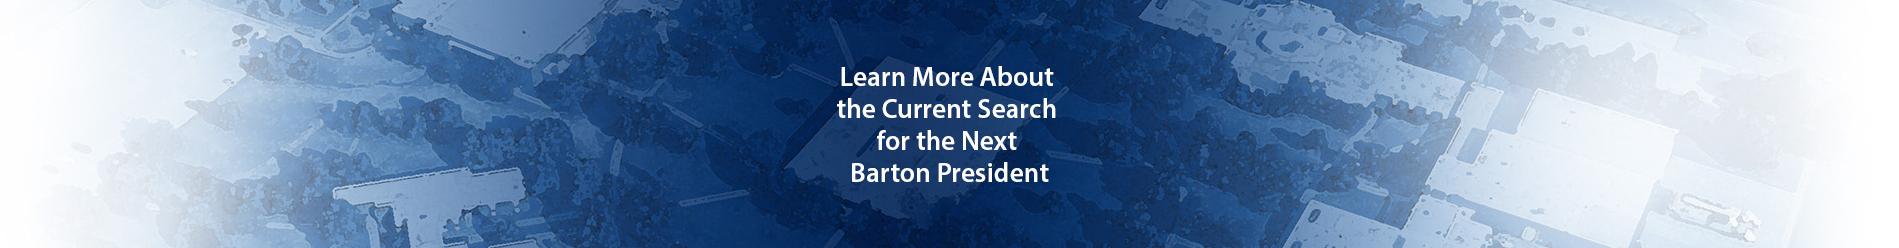 Learn more about the current search for the next Barton president.